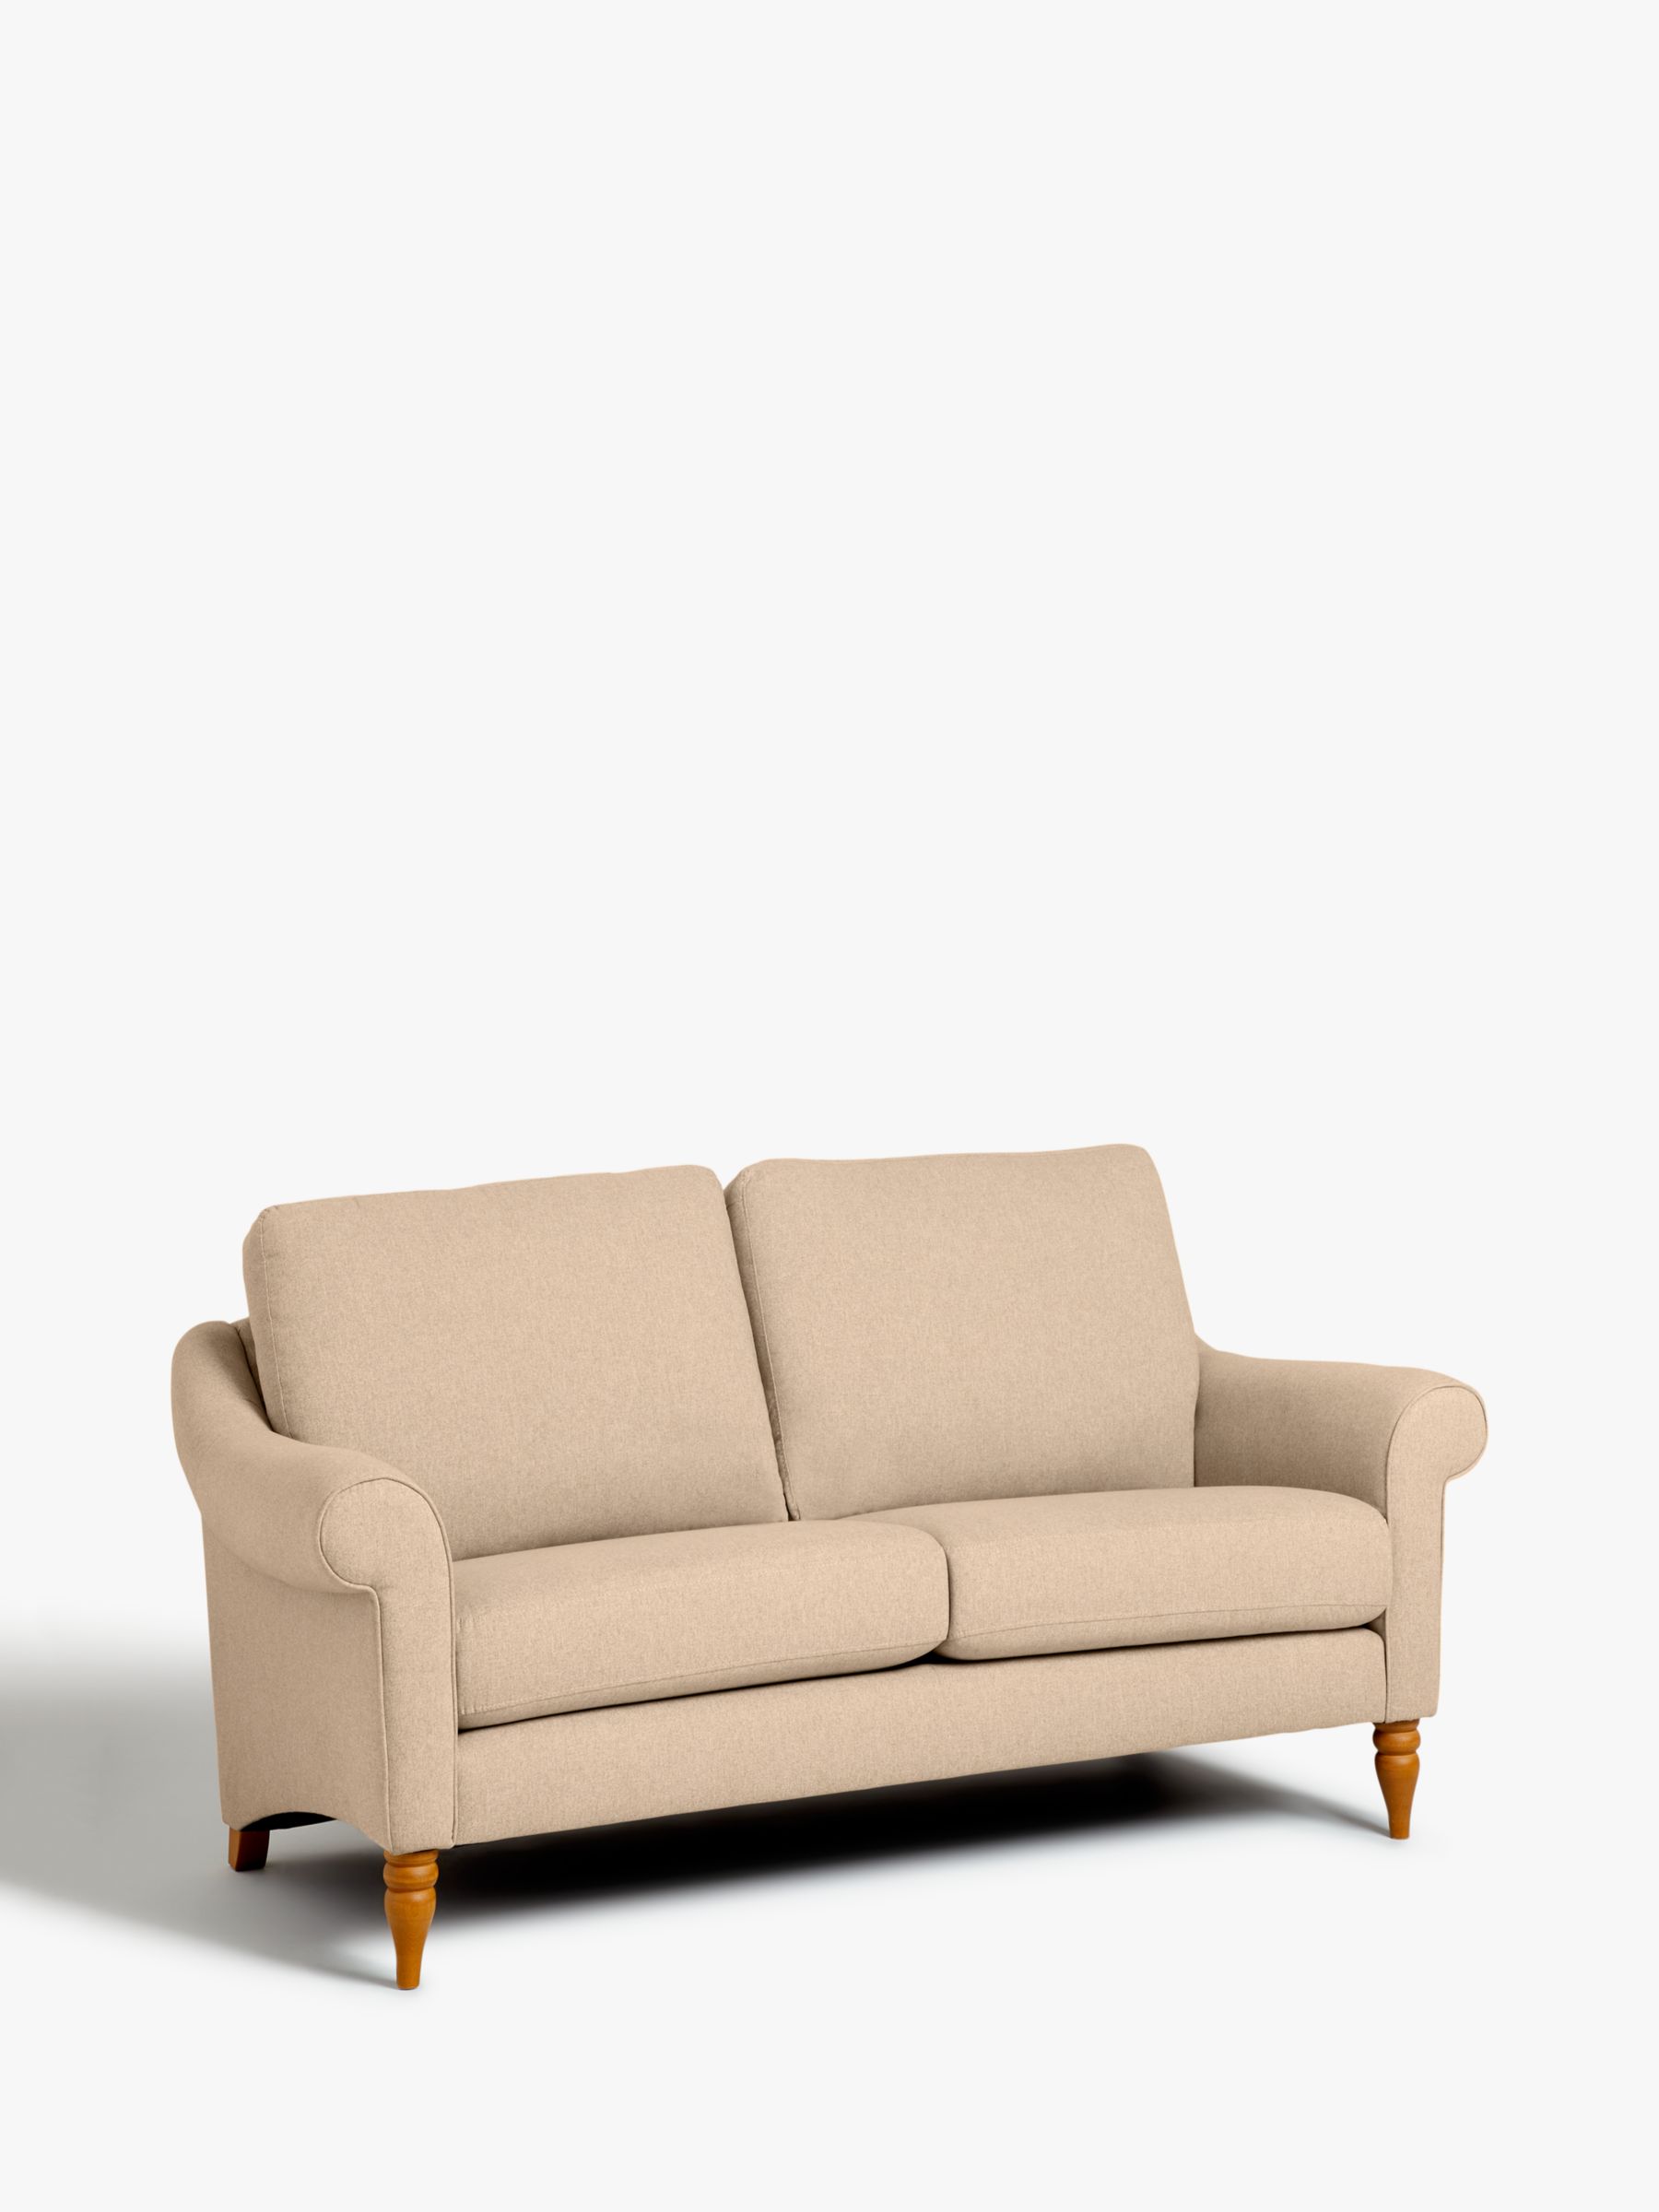 Camber Range, John Lewis Camber Small 2 Seater Sofa, Light Leg, Easy Clean Recycled Brushed Cotton Natural